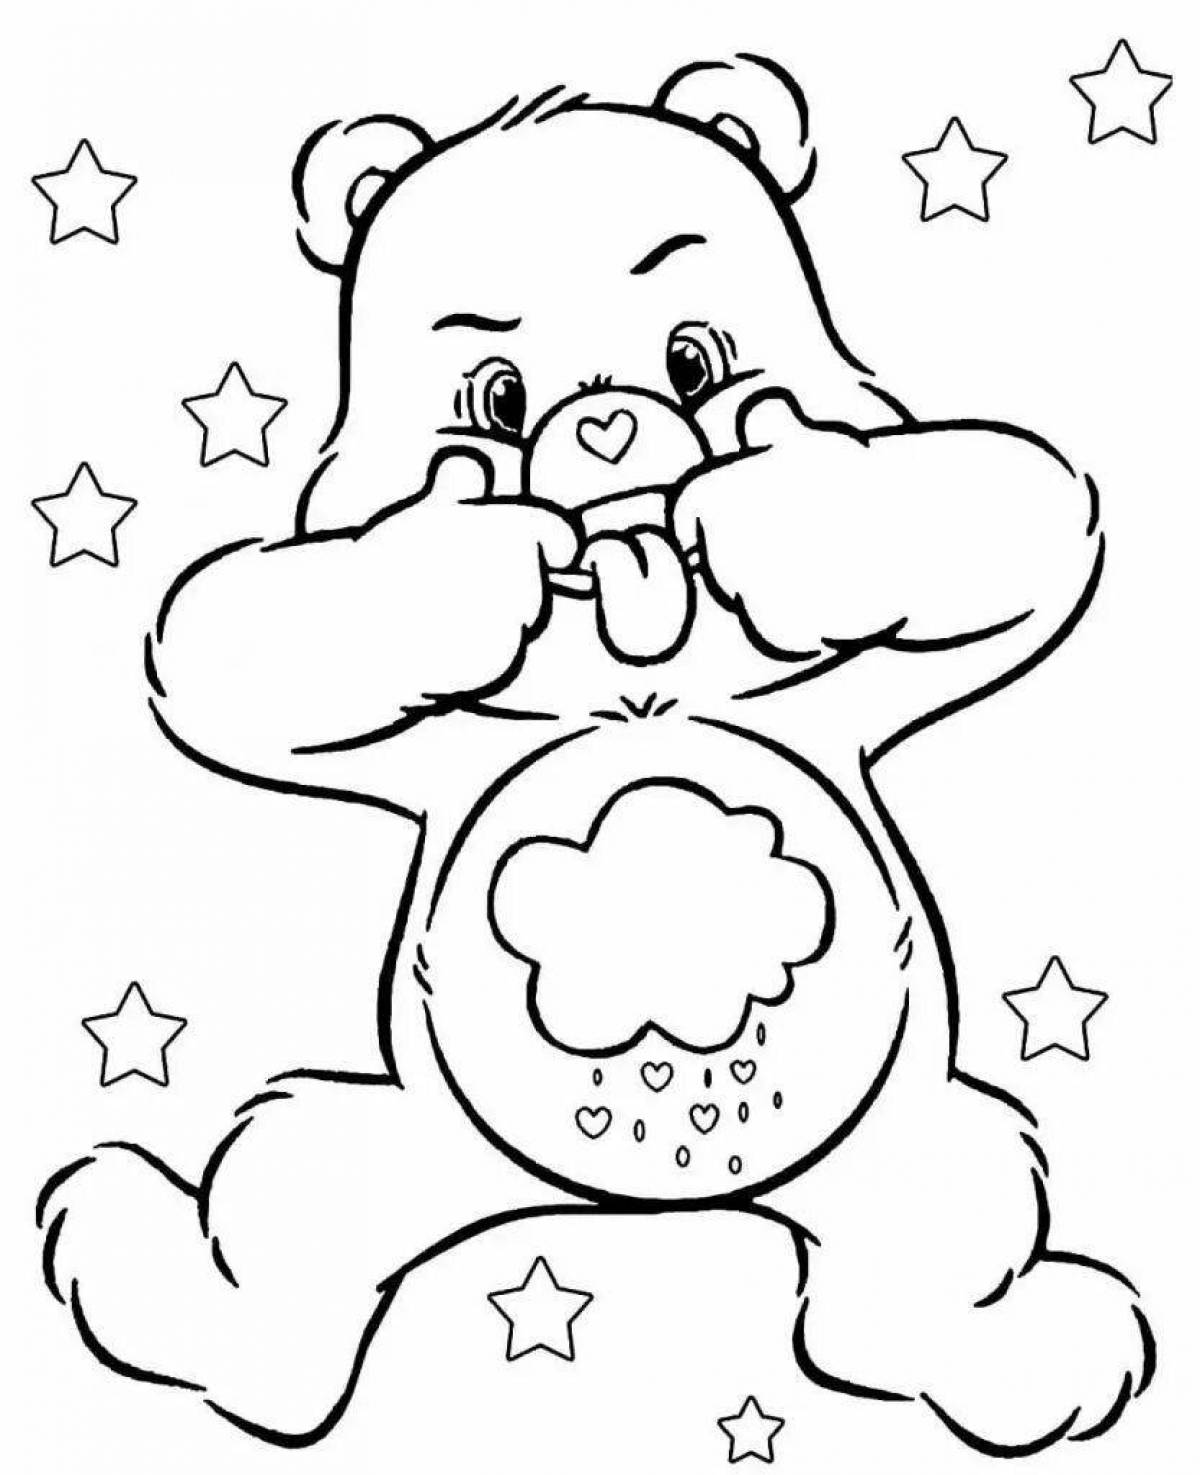 Colorful and cuddly teddy bear coloring book